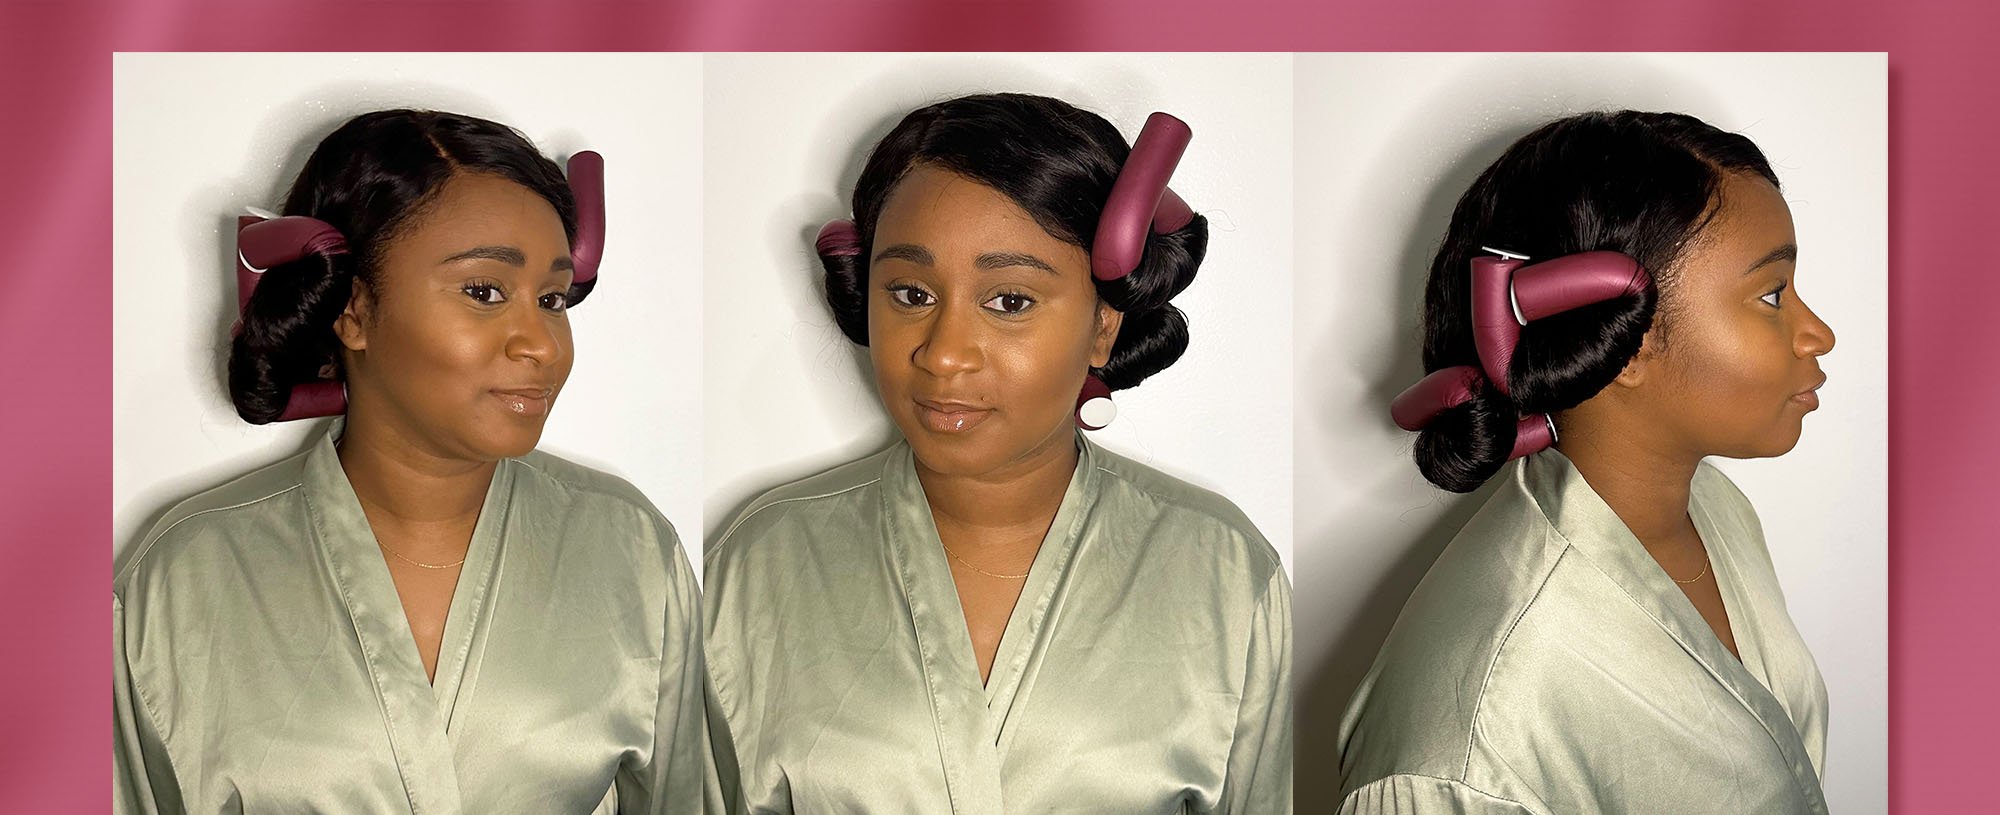 Getting The Commercial Editorial Smooth Hair Look Is Easier Than You Think